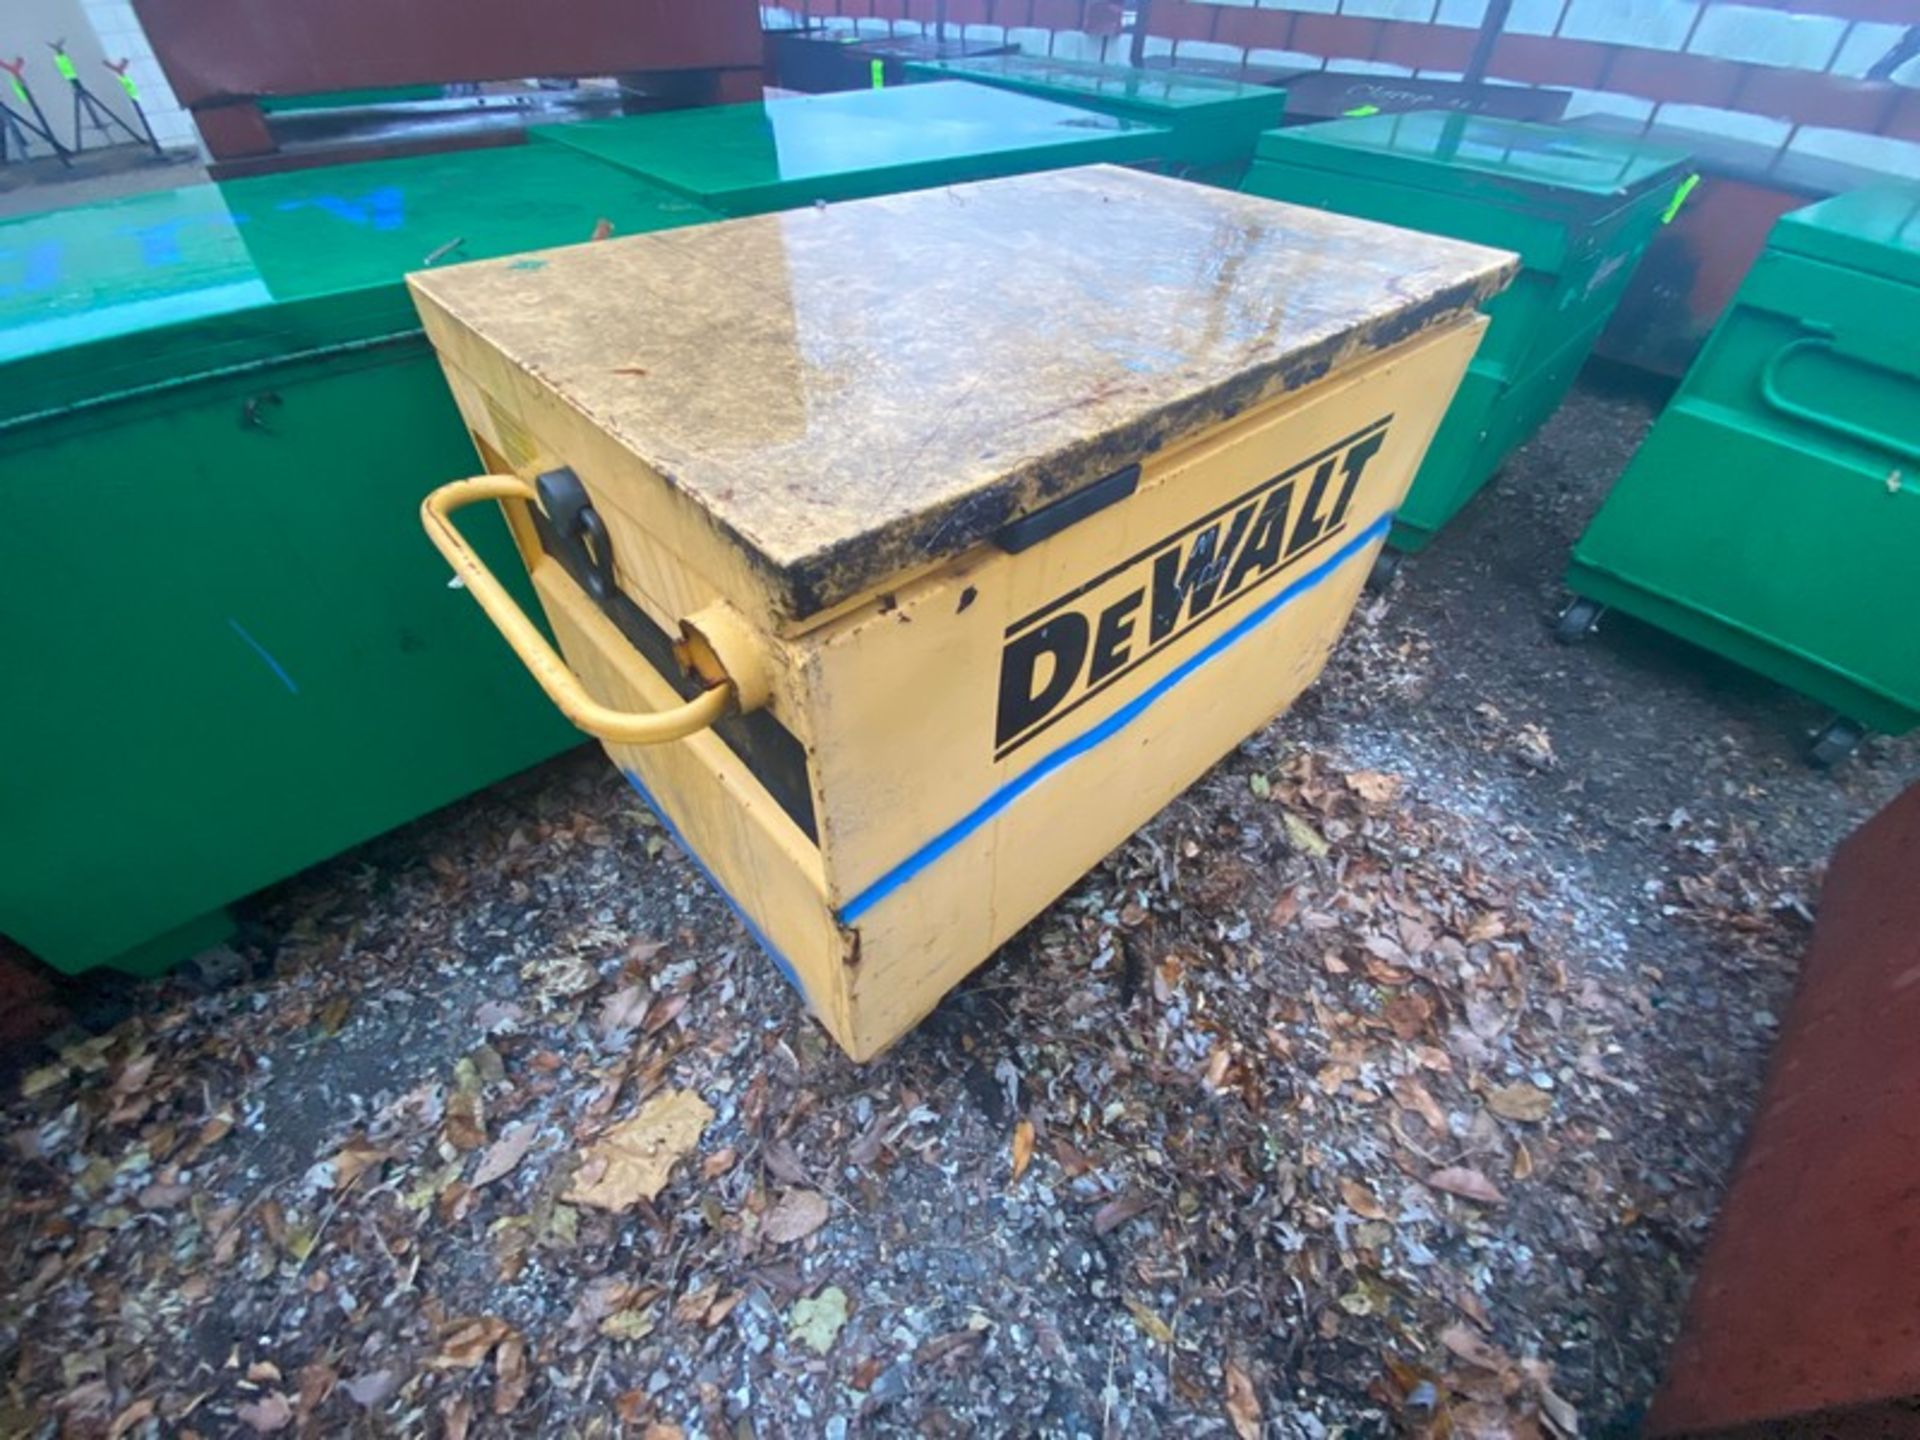 DeWalt Gang Box, with Hinge Lid, Overall Dims.: Aprox. 50” L x 32” W x 34” H, with Handles & Mounted - Bild 2 aus 3